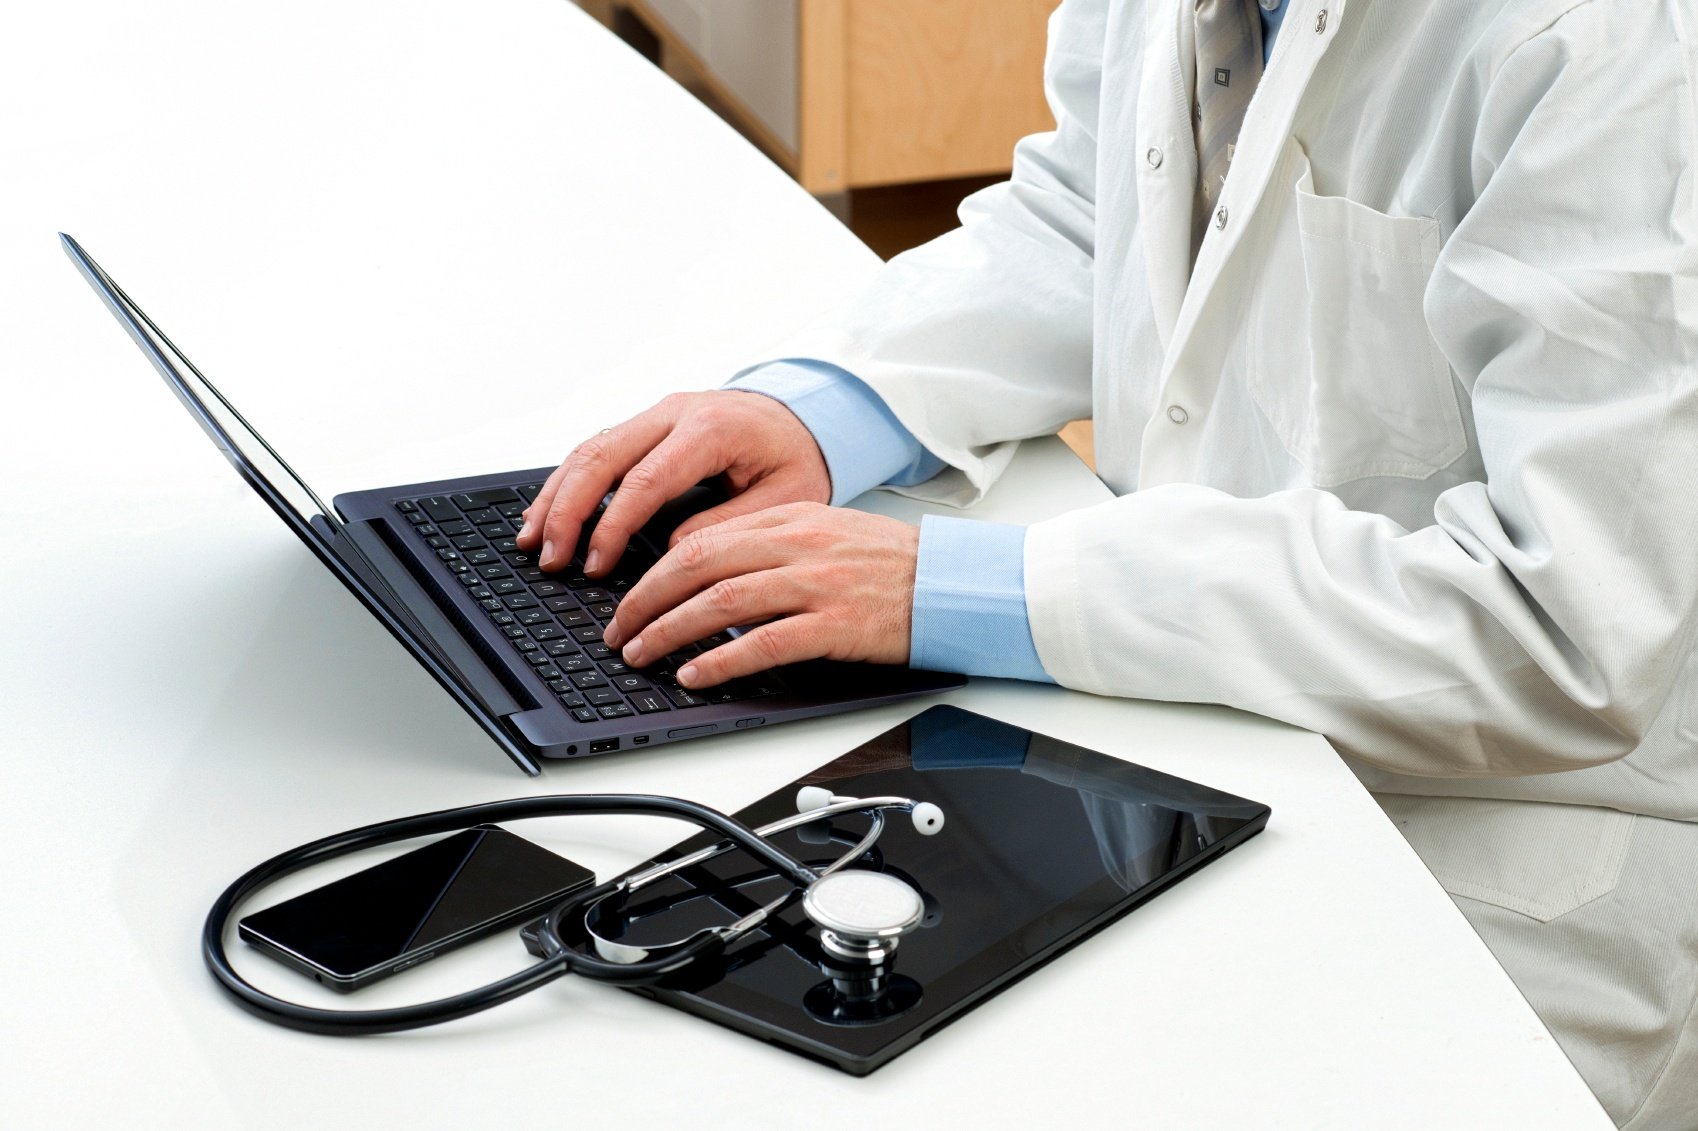 Top 7 Myths About Healthcare Technology